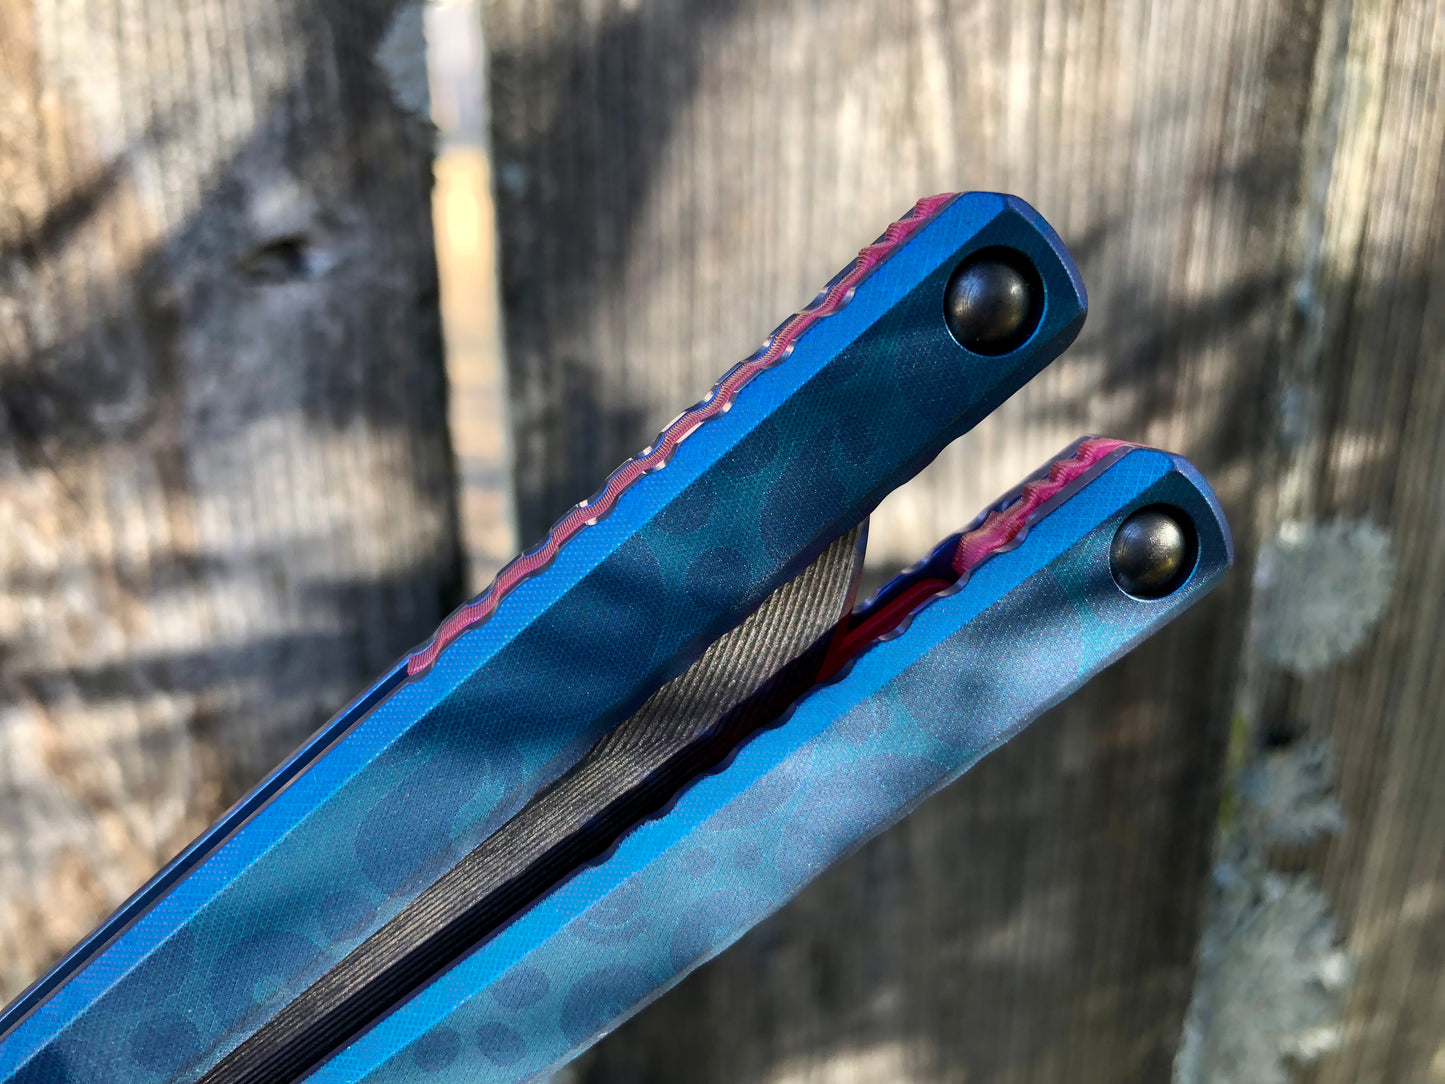 These Zippy spacers designed for the Fellowship Blades Gaboon balisong are made in-house from a rubbery, shatter-proof polyurethane. They add additional jimping to the Gaboon, and are also available as extensions which add handle length, protect the handles from drops, and include an adjustable tungsten weight system.